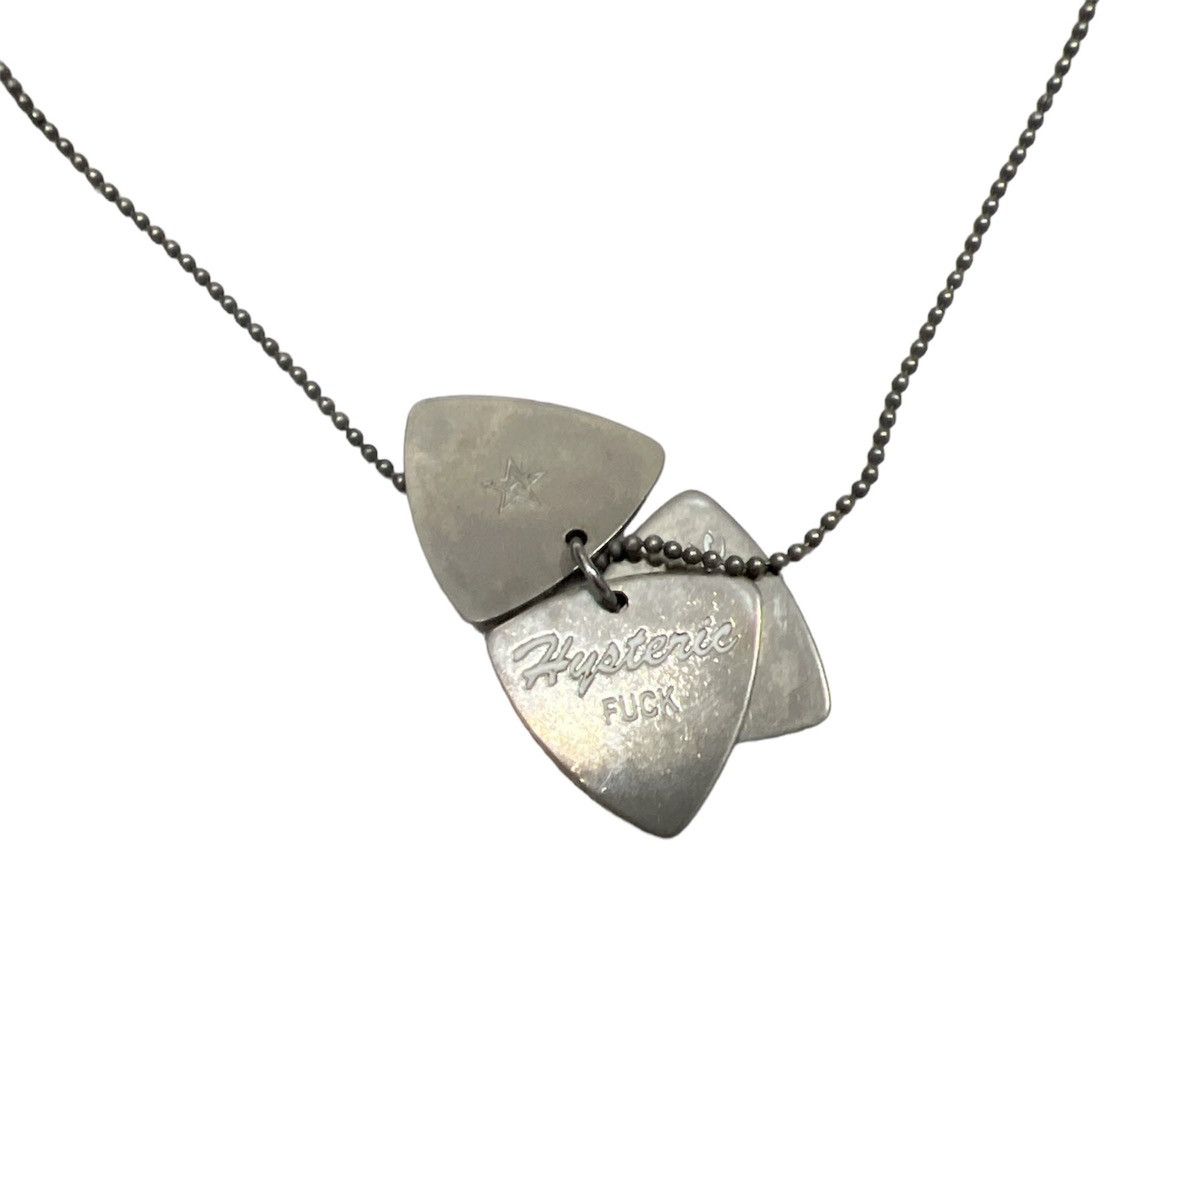 Hysteric Glamour silver guitar pick necklace - 4